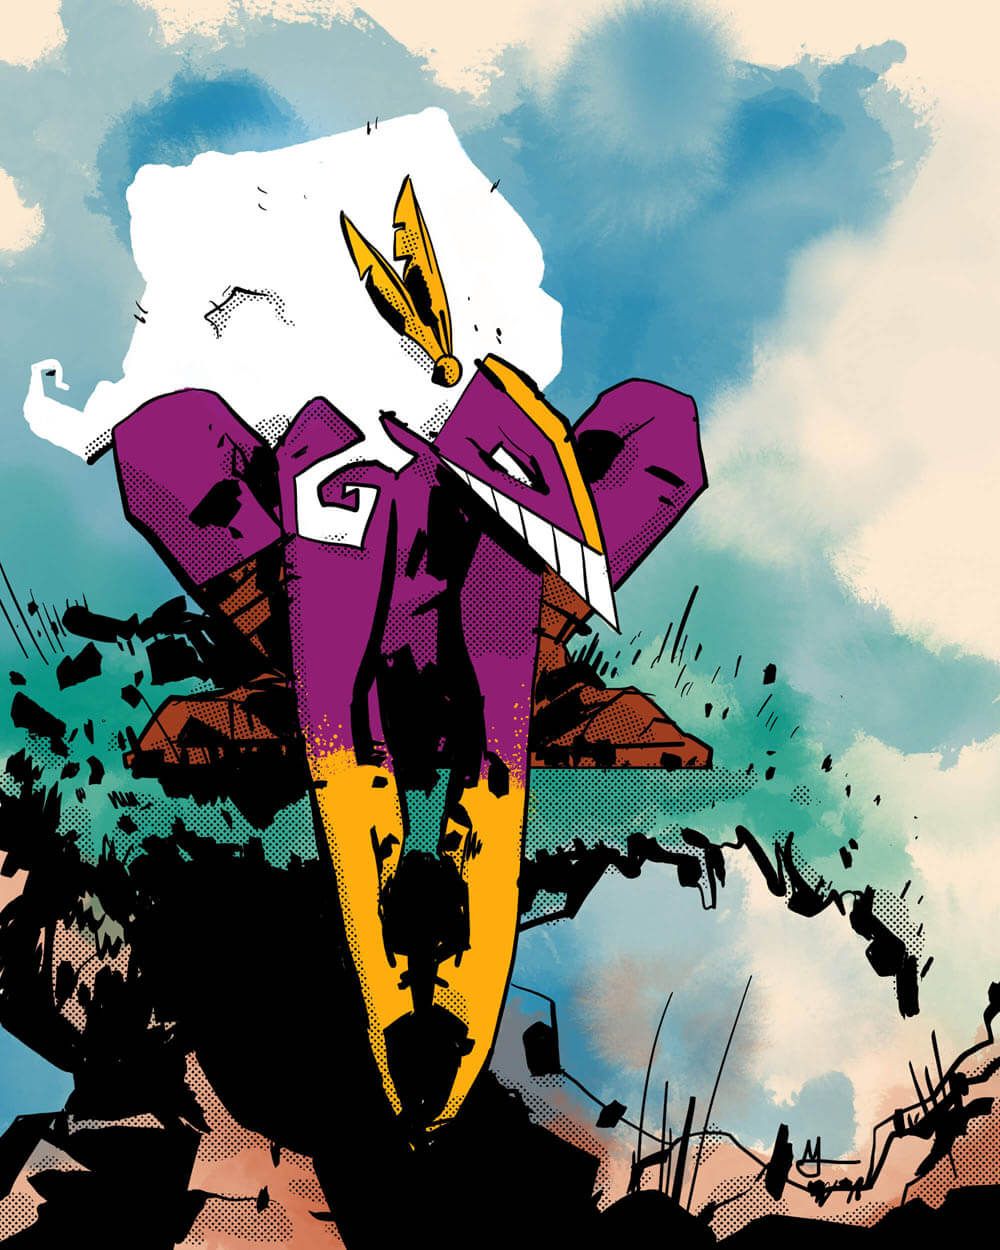 The Maxx sitting hunched over in the Outback.